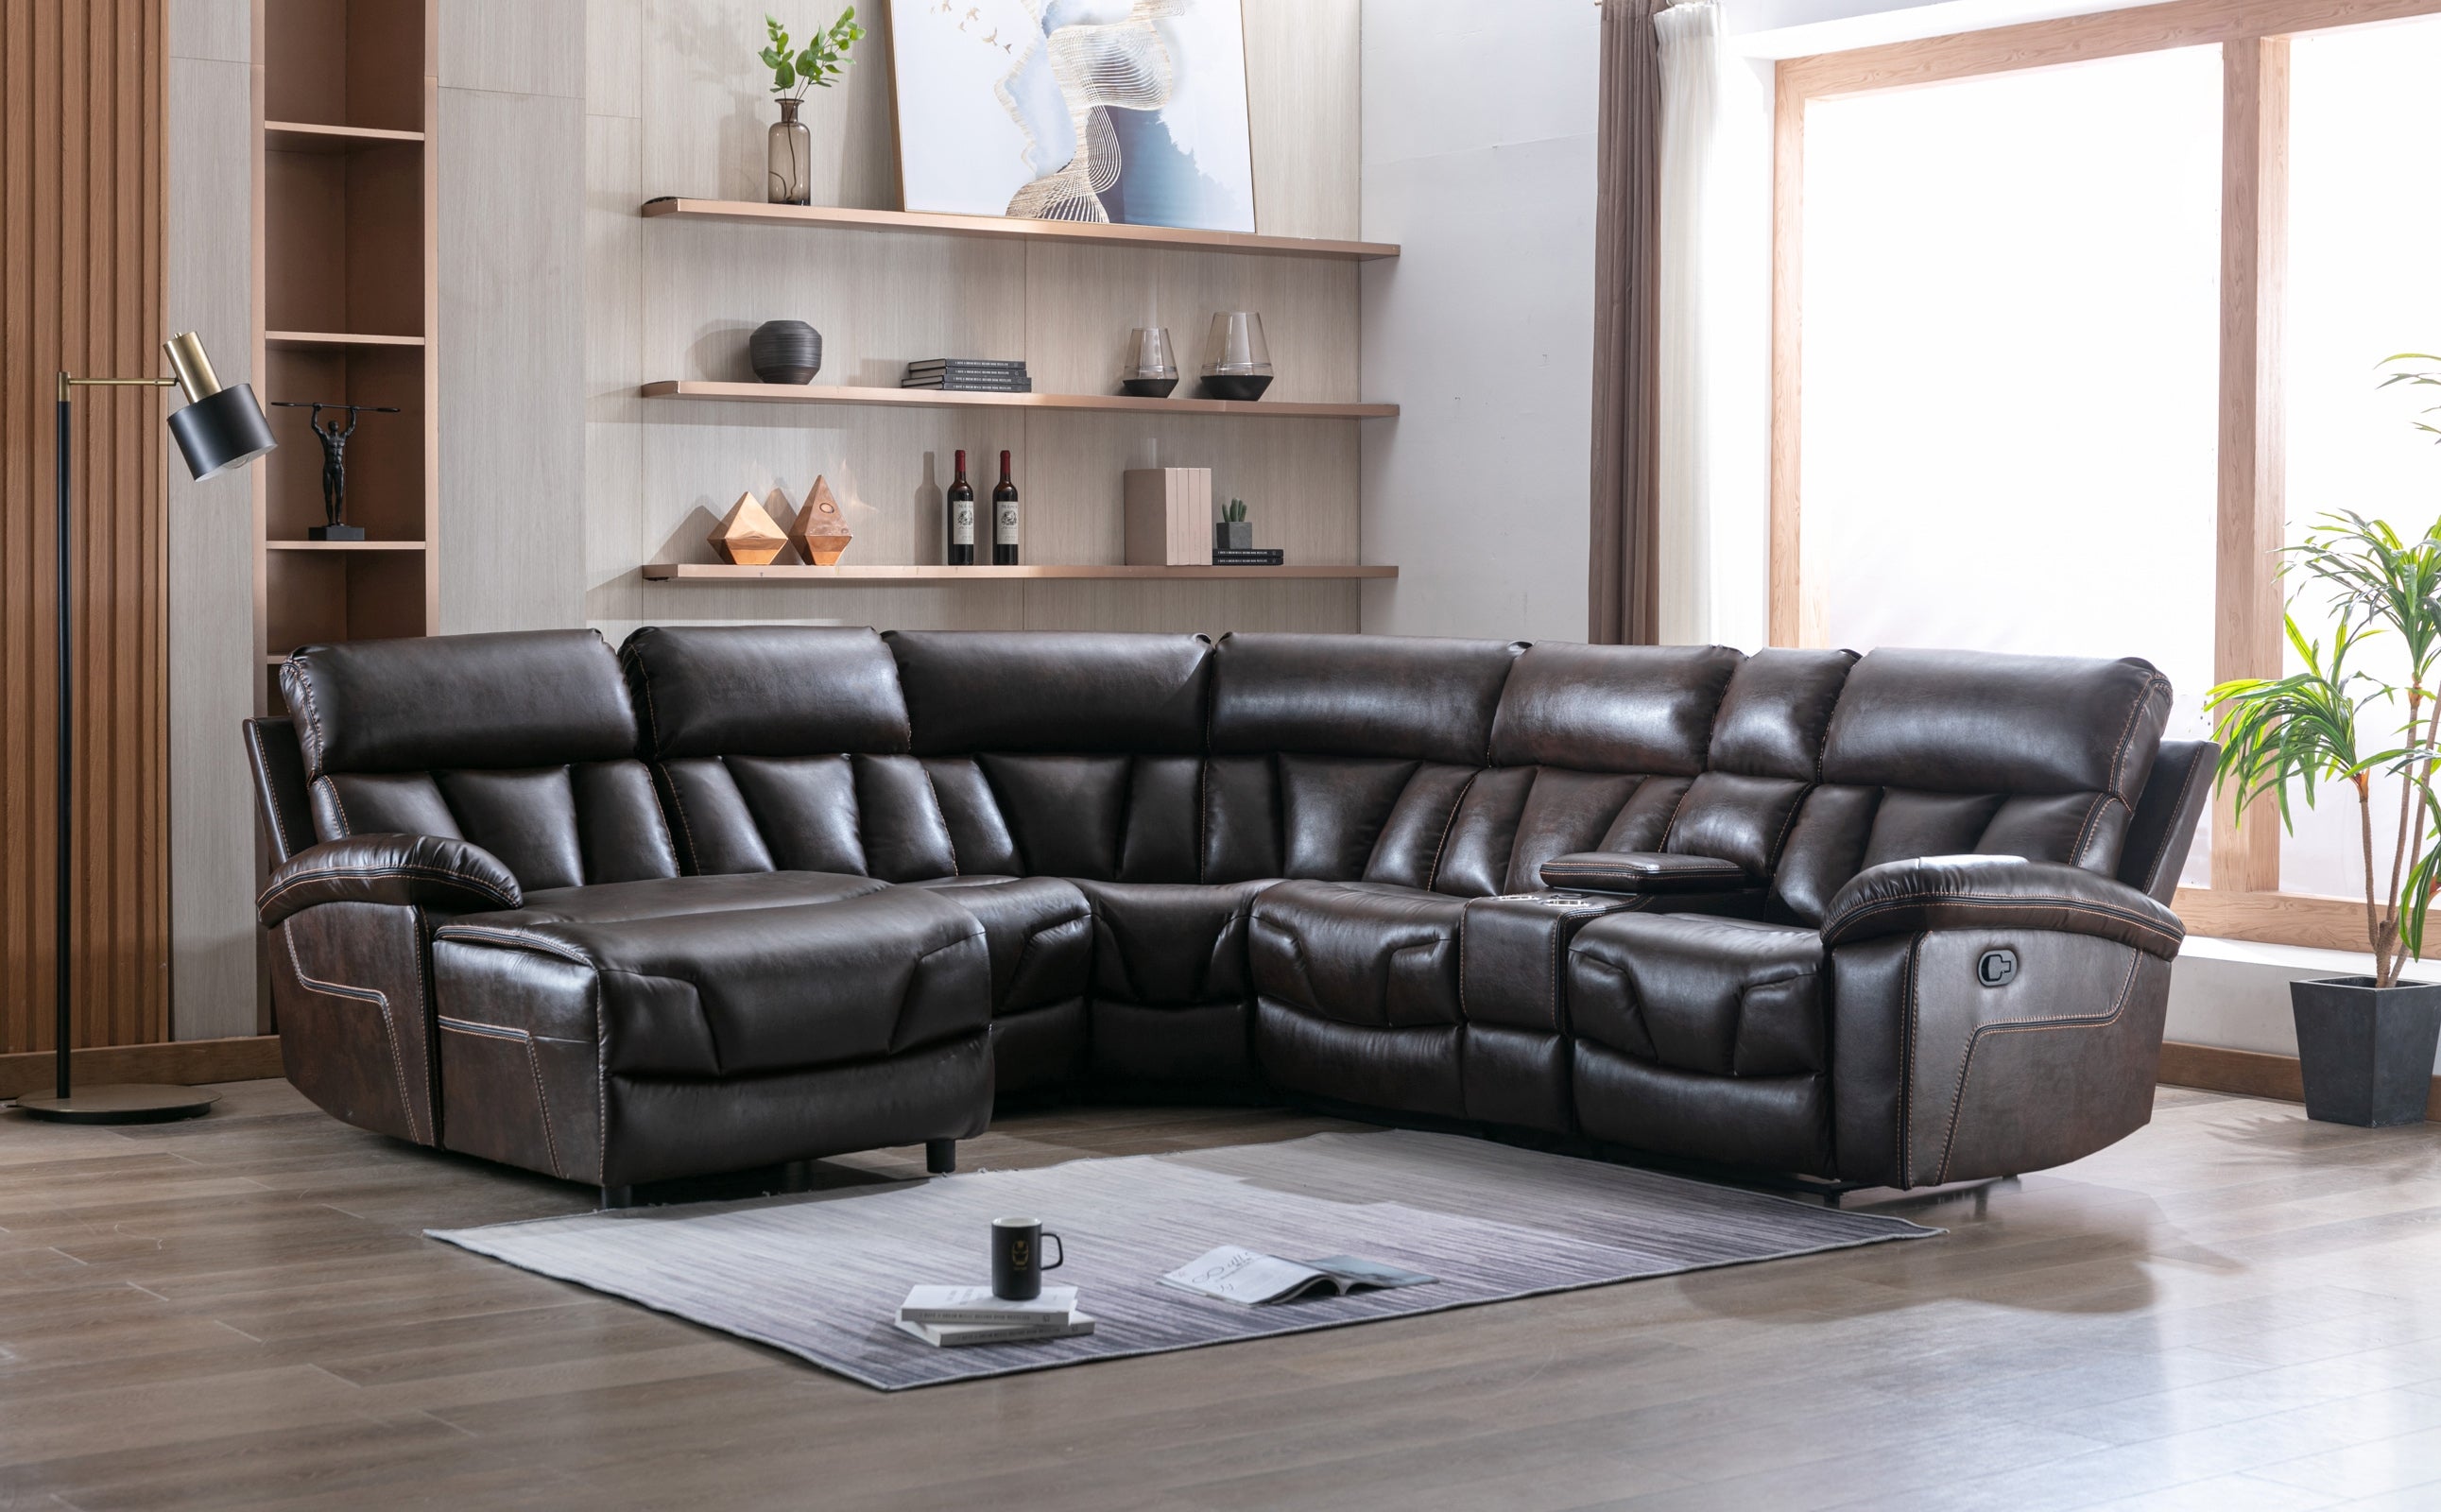 6-Piece Modular Brown Reclining Sectional with Left Side Chaise 99931BRWSS6L